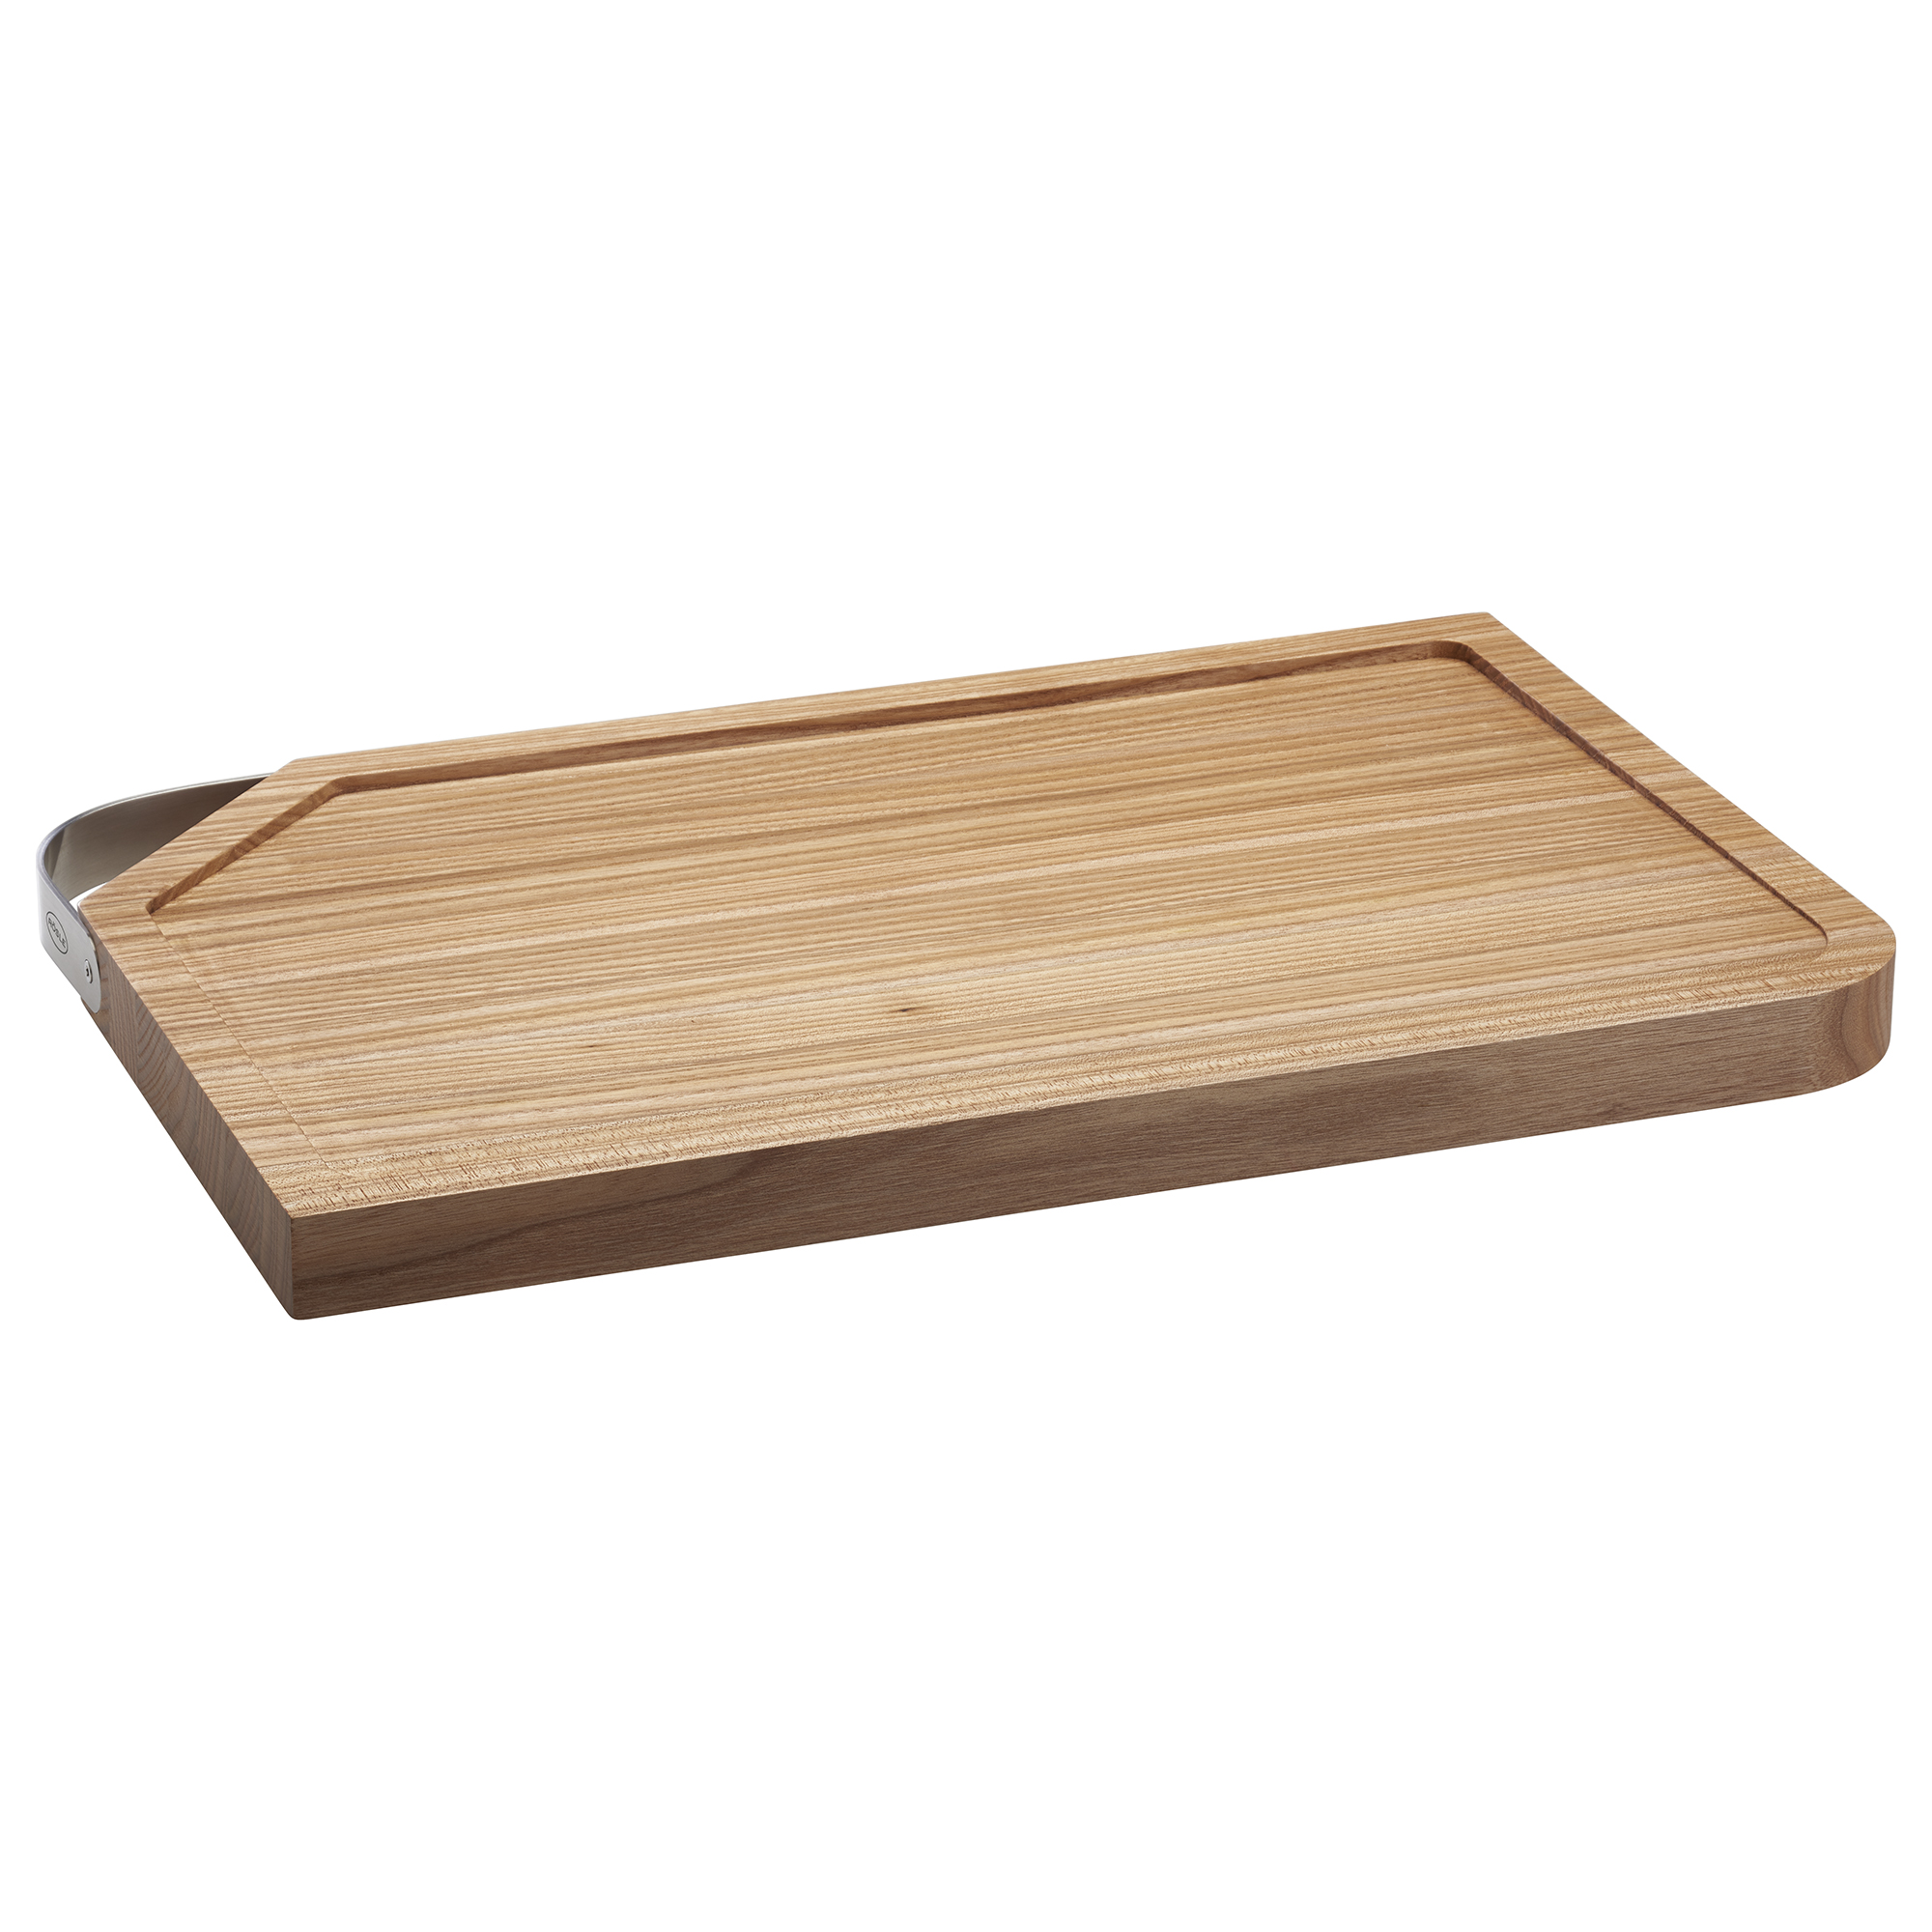 Cutting Board 48x32 cm | 18.9 x 12.6 in.with stainless steel handle